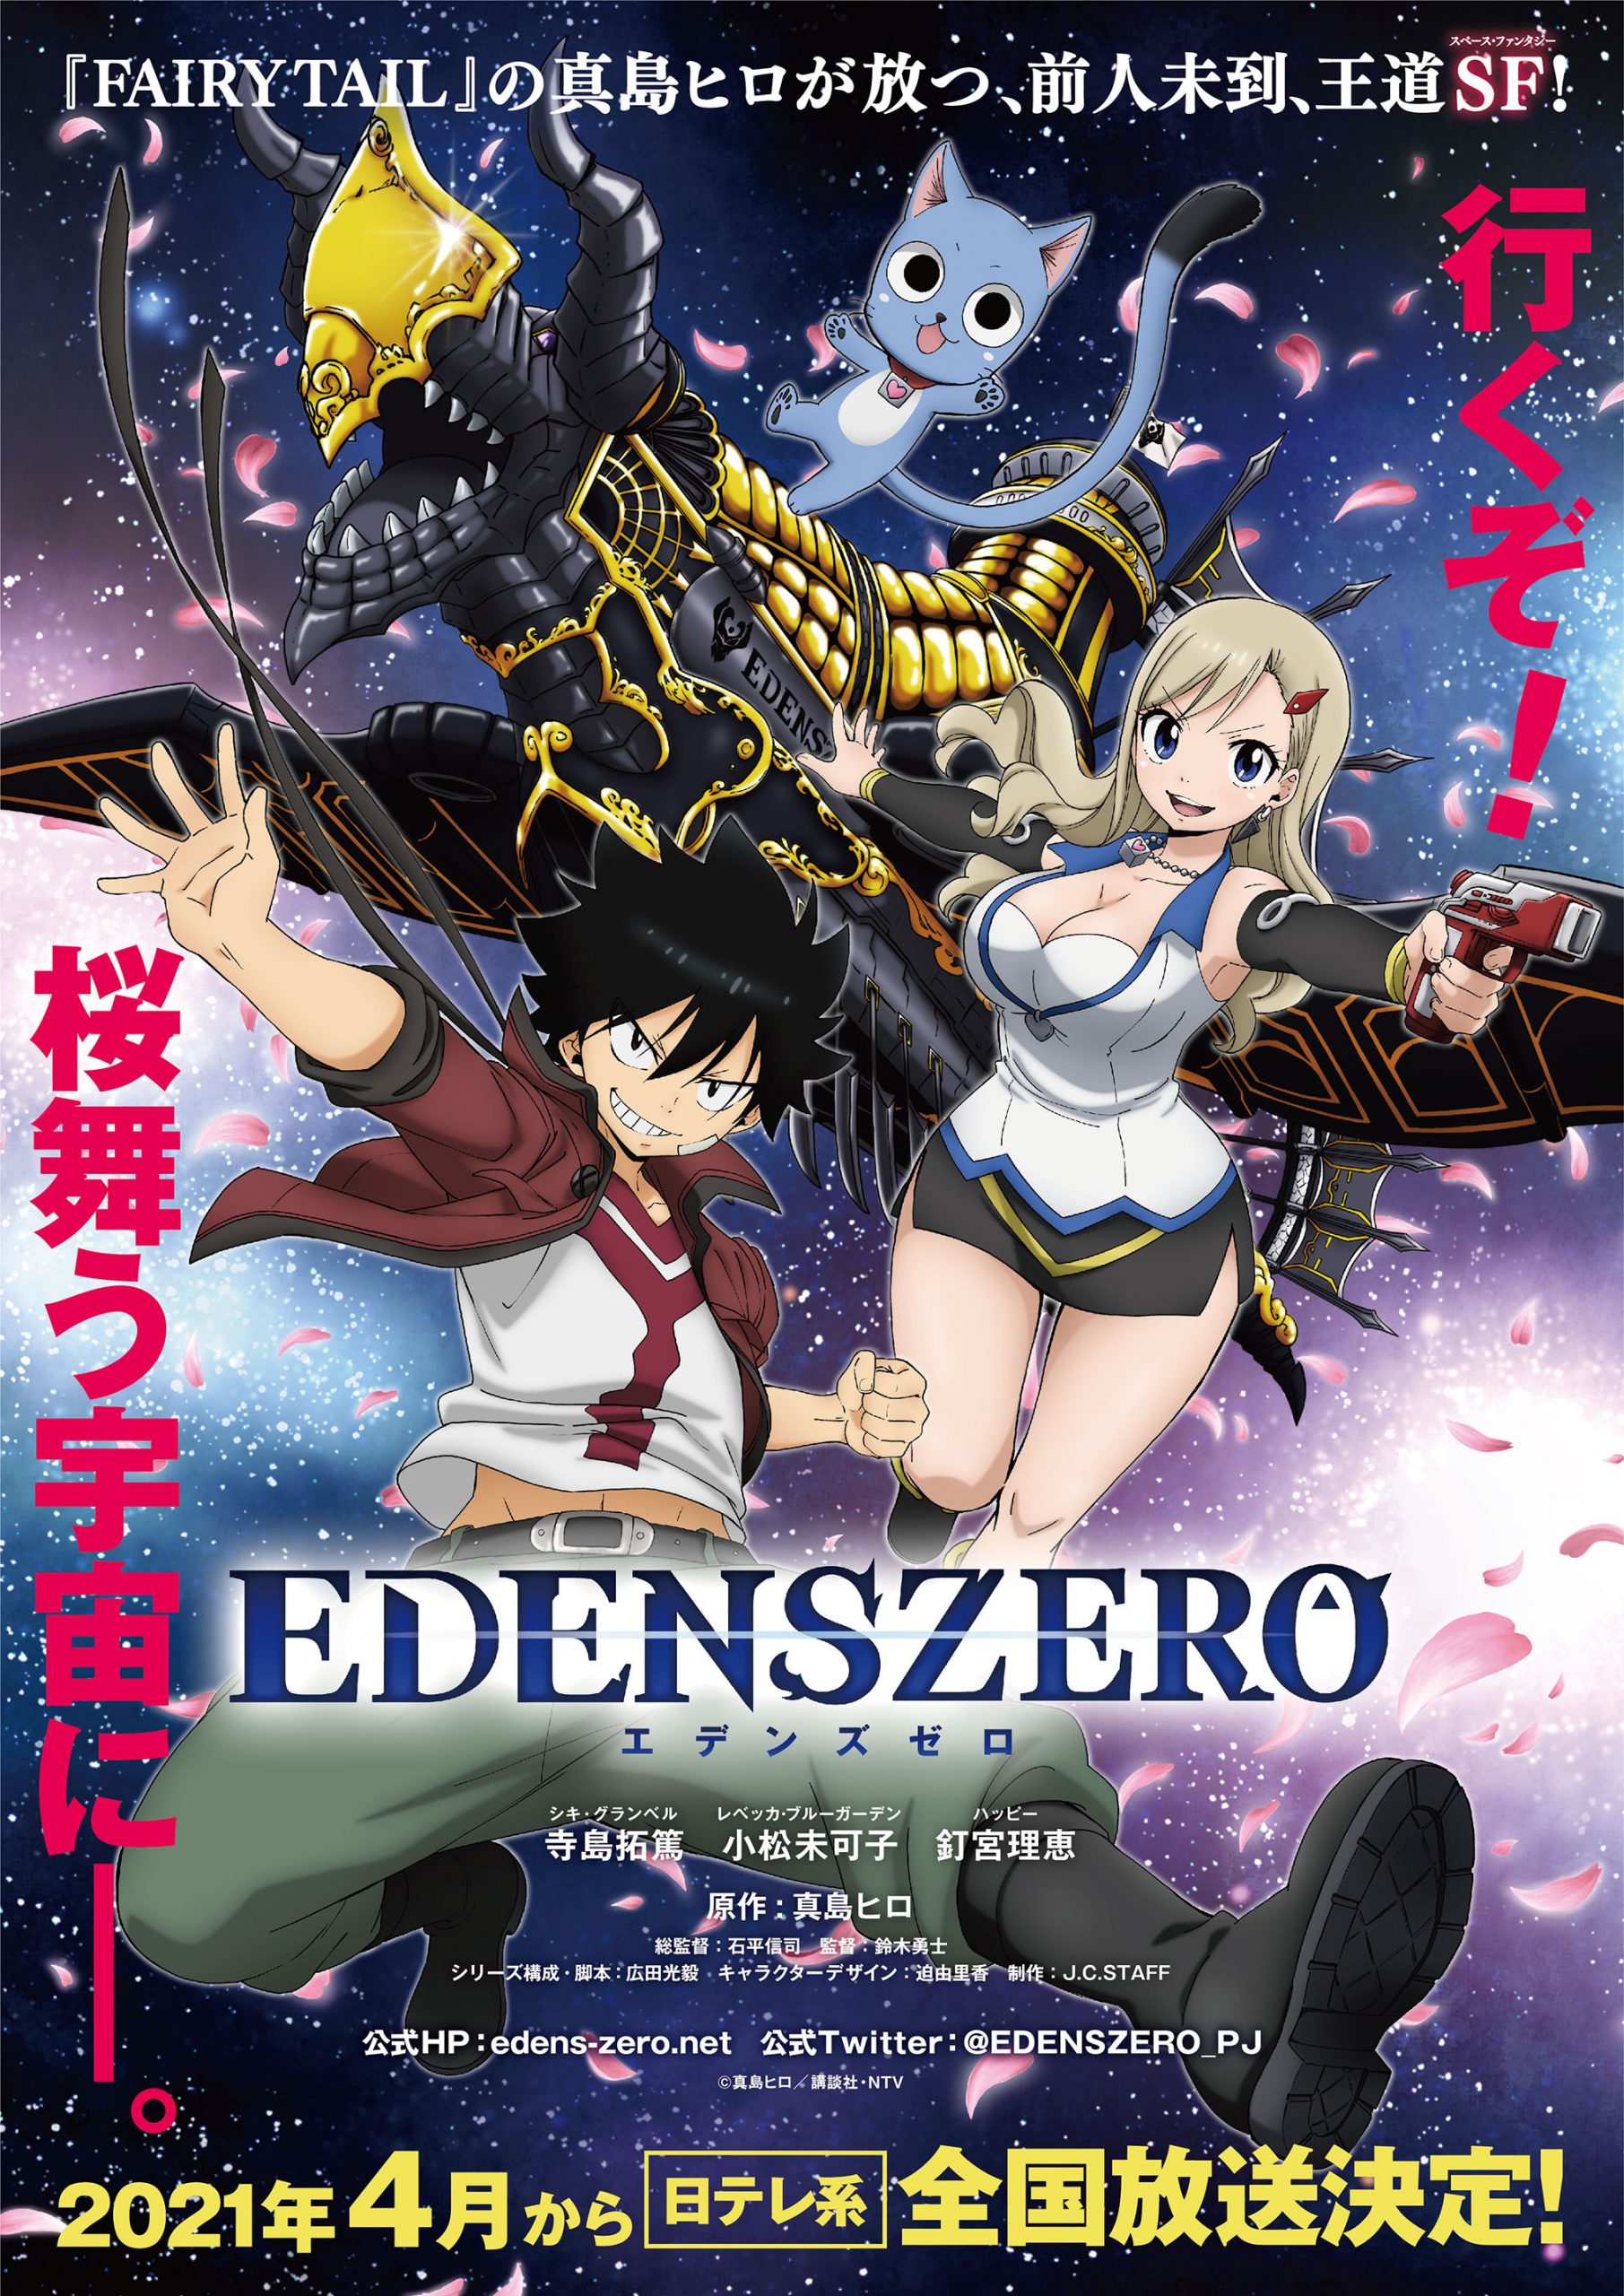 Edens Zero Promo Video Revealed - Slated to Air from April 11 - Swaps4